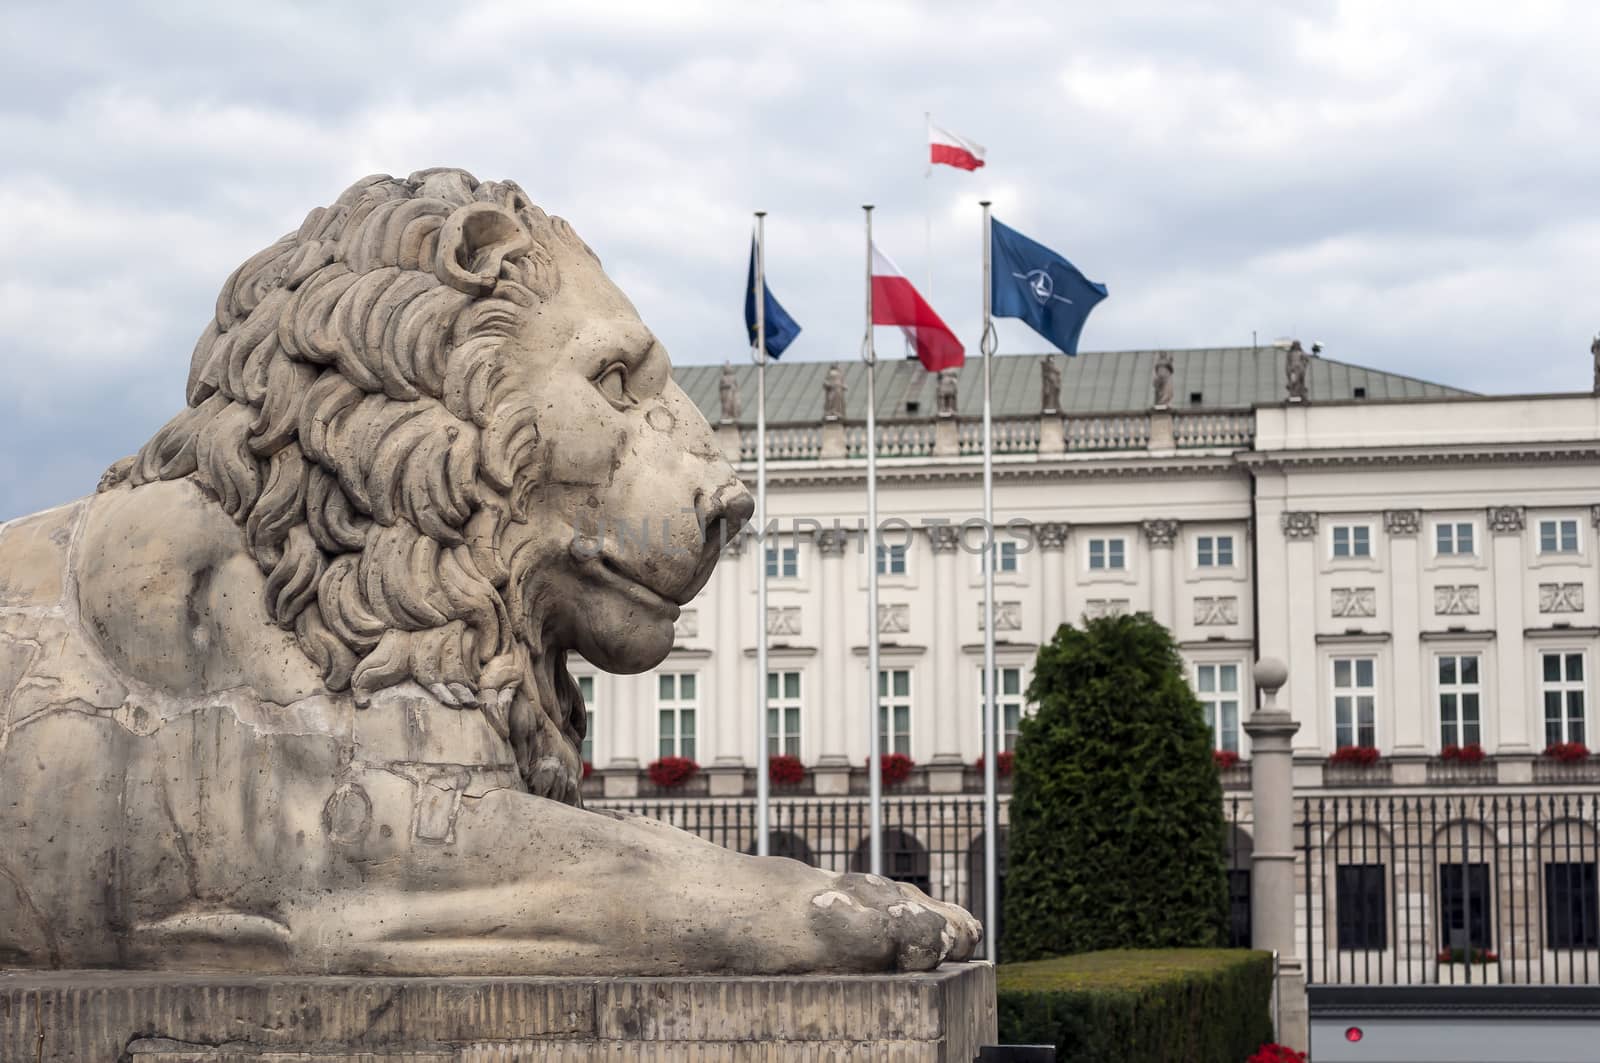 Lion statue at the Presidential Palace in the city of Warsaw, Poland.